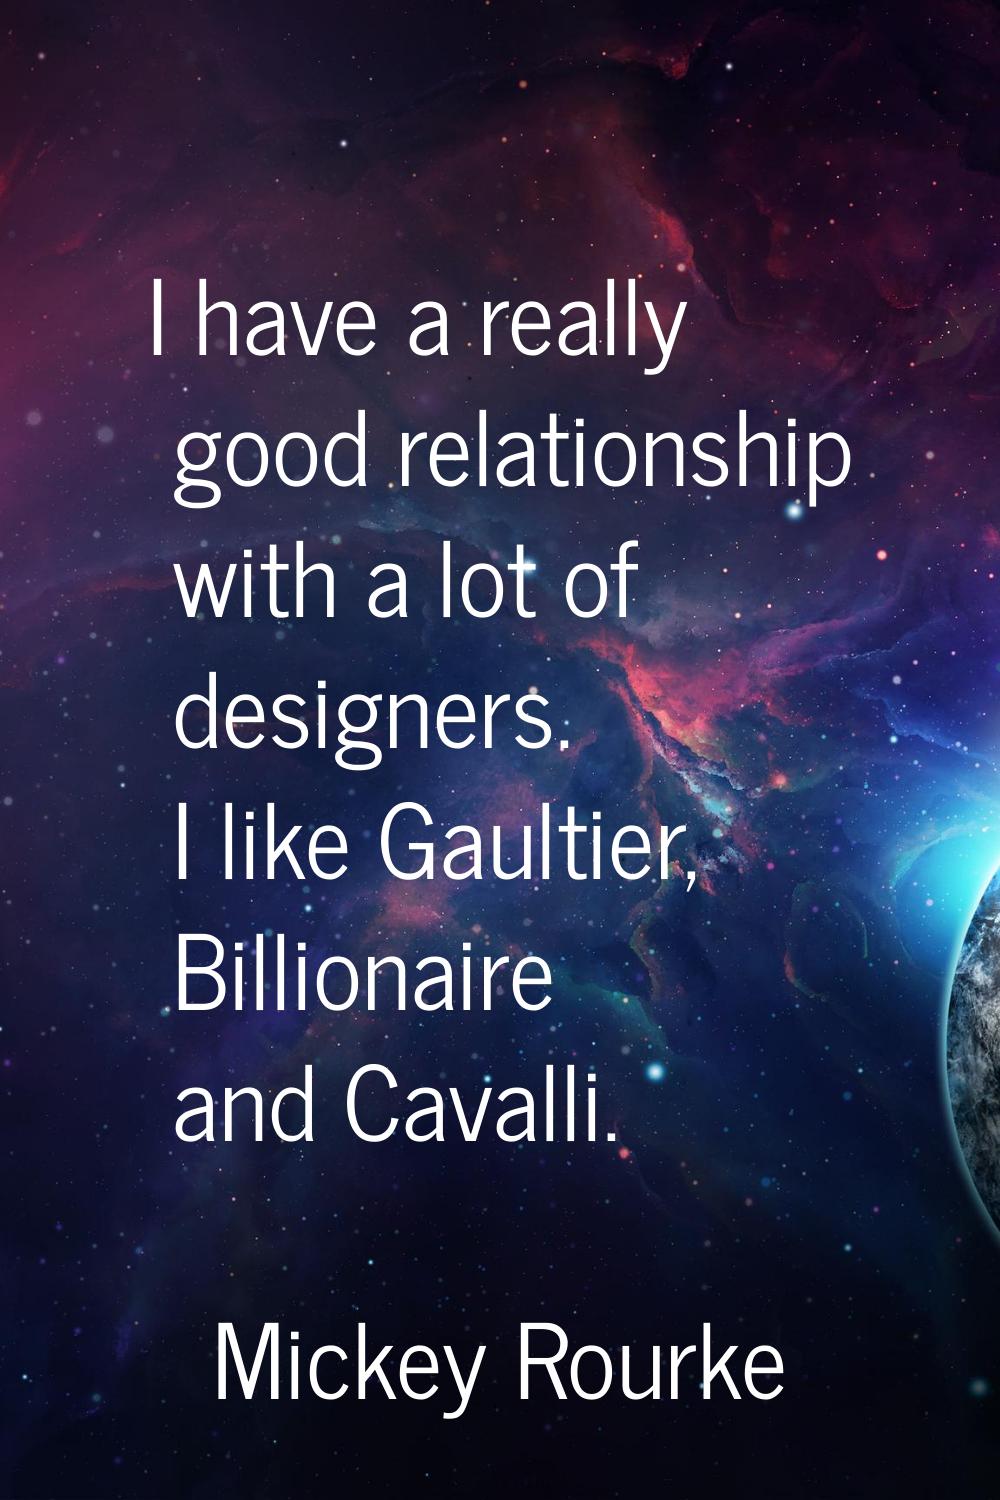 I have a really good relationship with a lot of designers. I like Gaultier, Billionaire and Cavalli